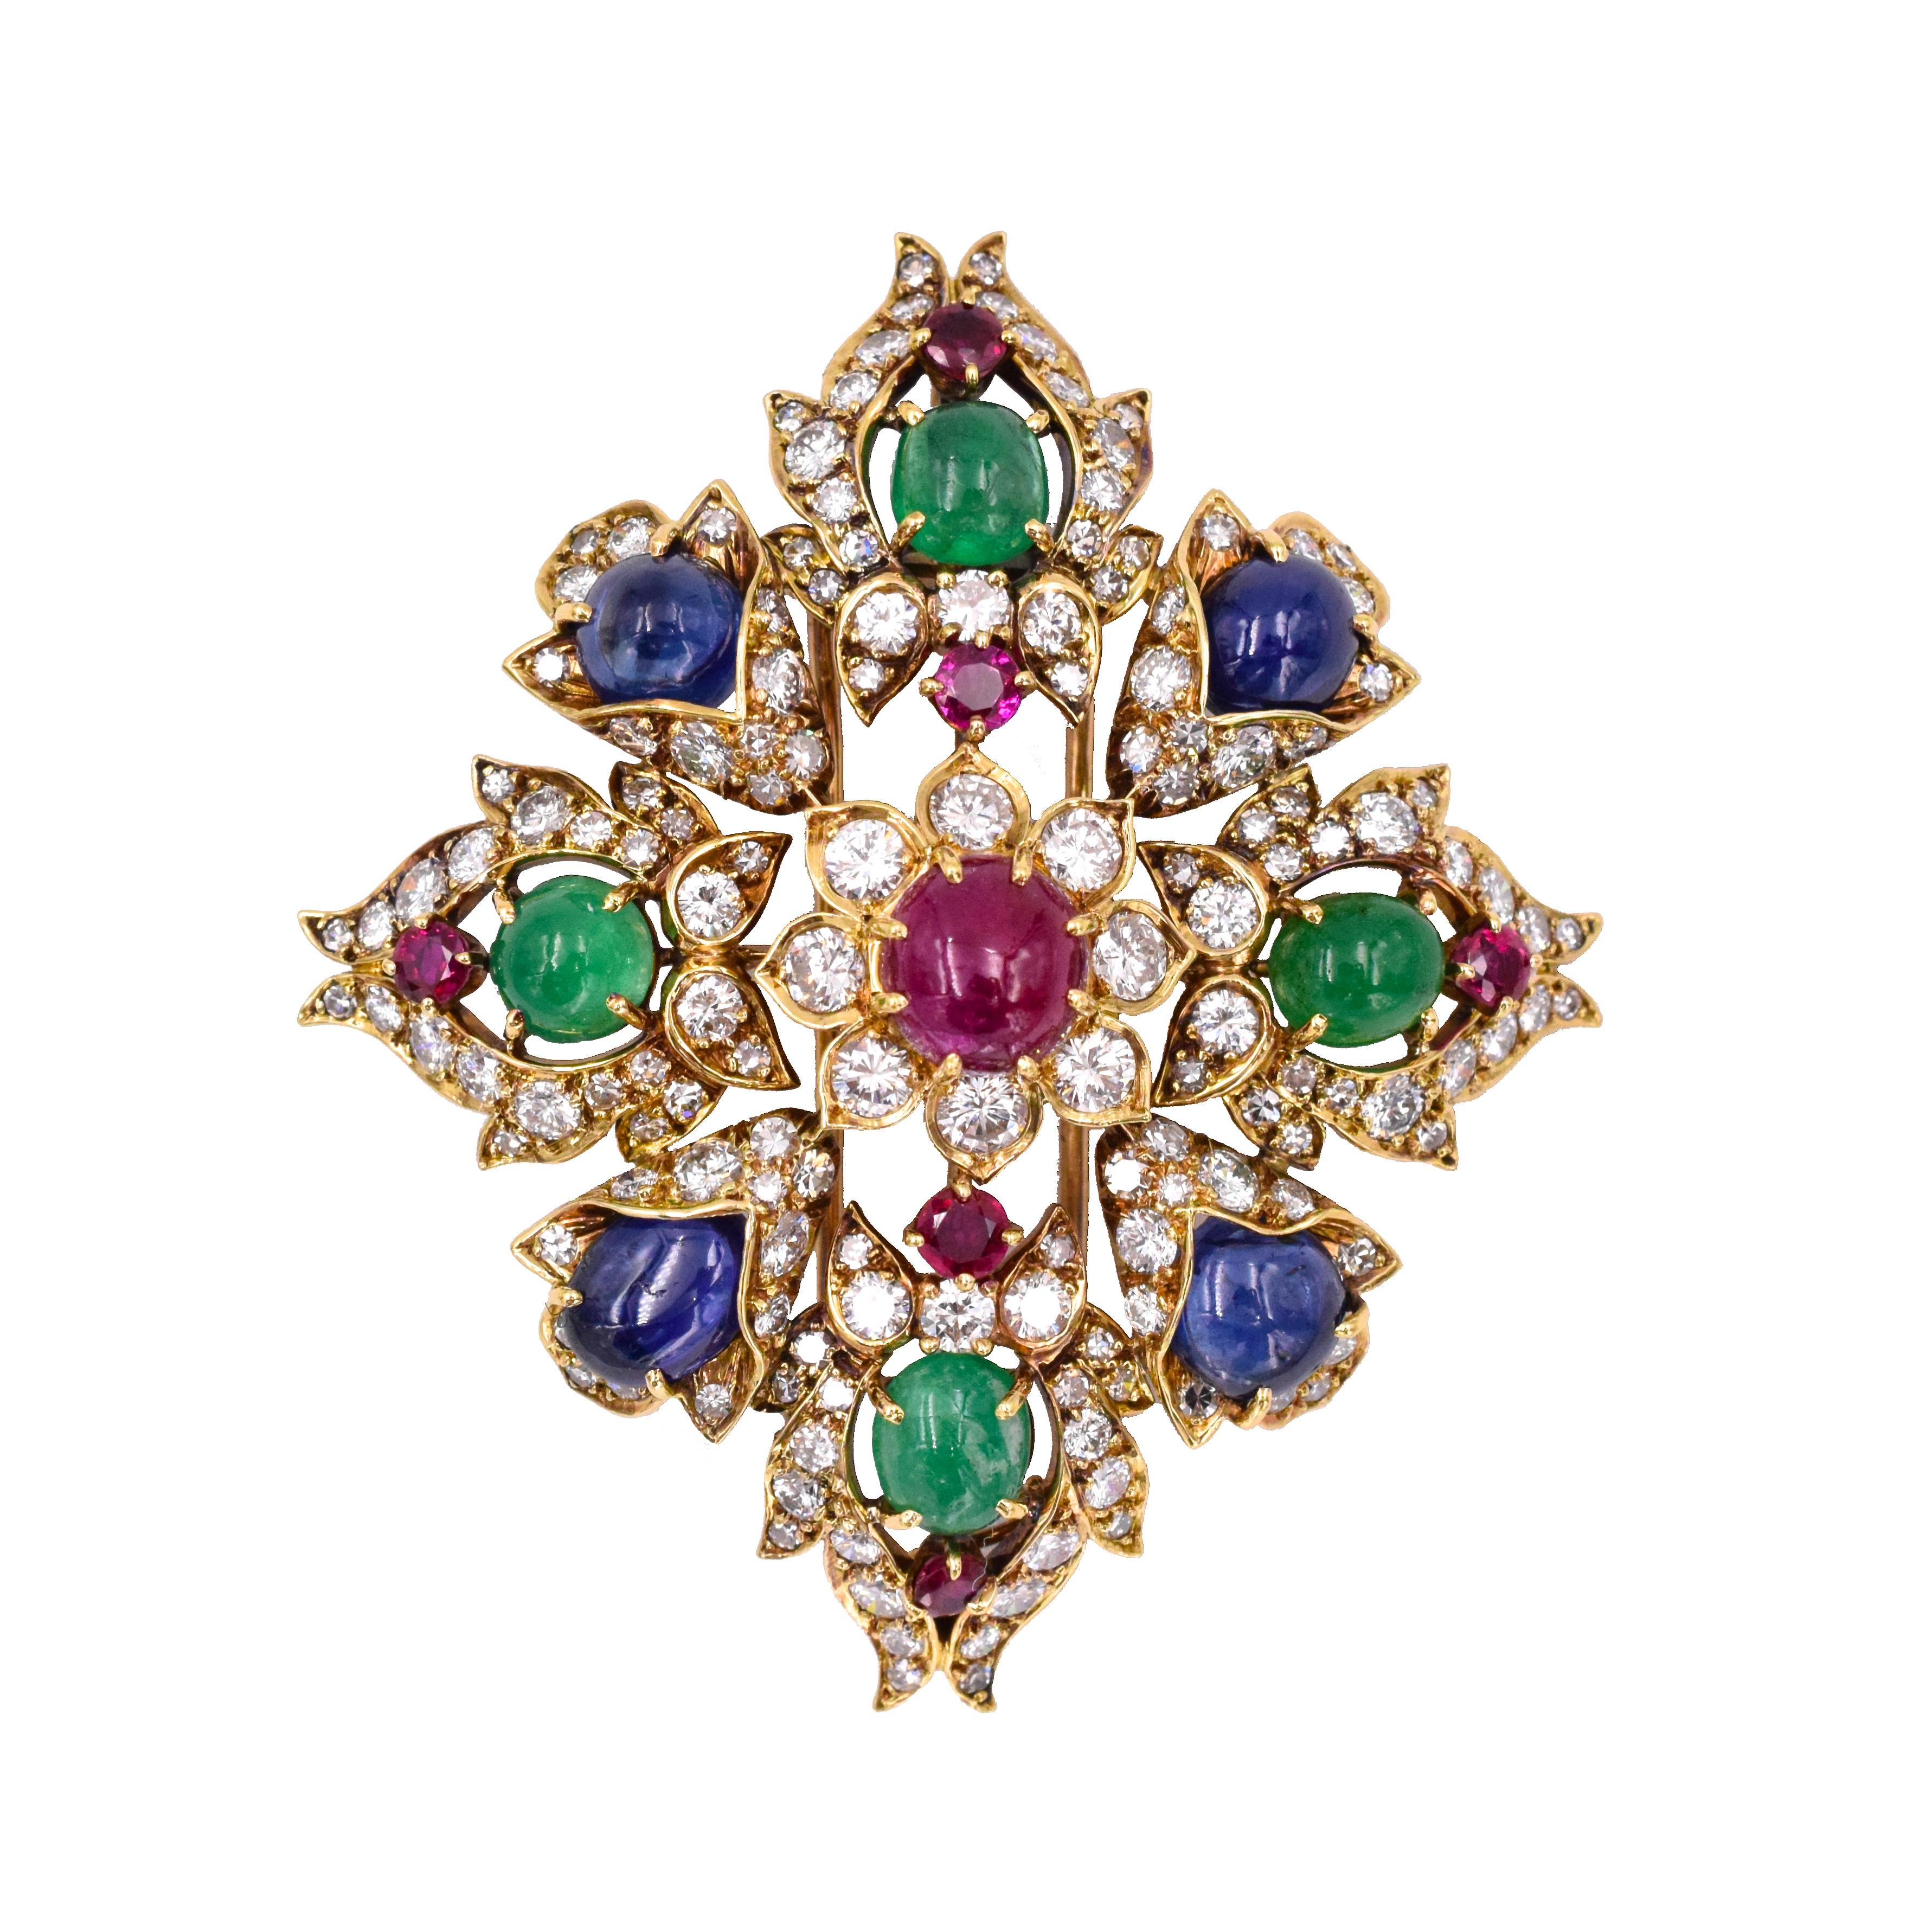 Classic Vintage  Van Cleef & Arpels Diamond, ruby, sapphire & emerald brooch/pendant. Spectacular colorful brooch with 3.32 carats of diamonds, rubies are 4.5 carats, sapphires are 7.5 carats & emeralds are 4 carats.
18k gold Makers' signature VCA &